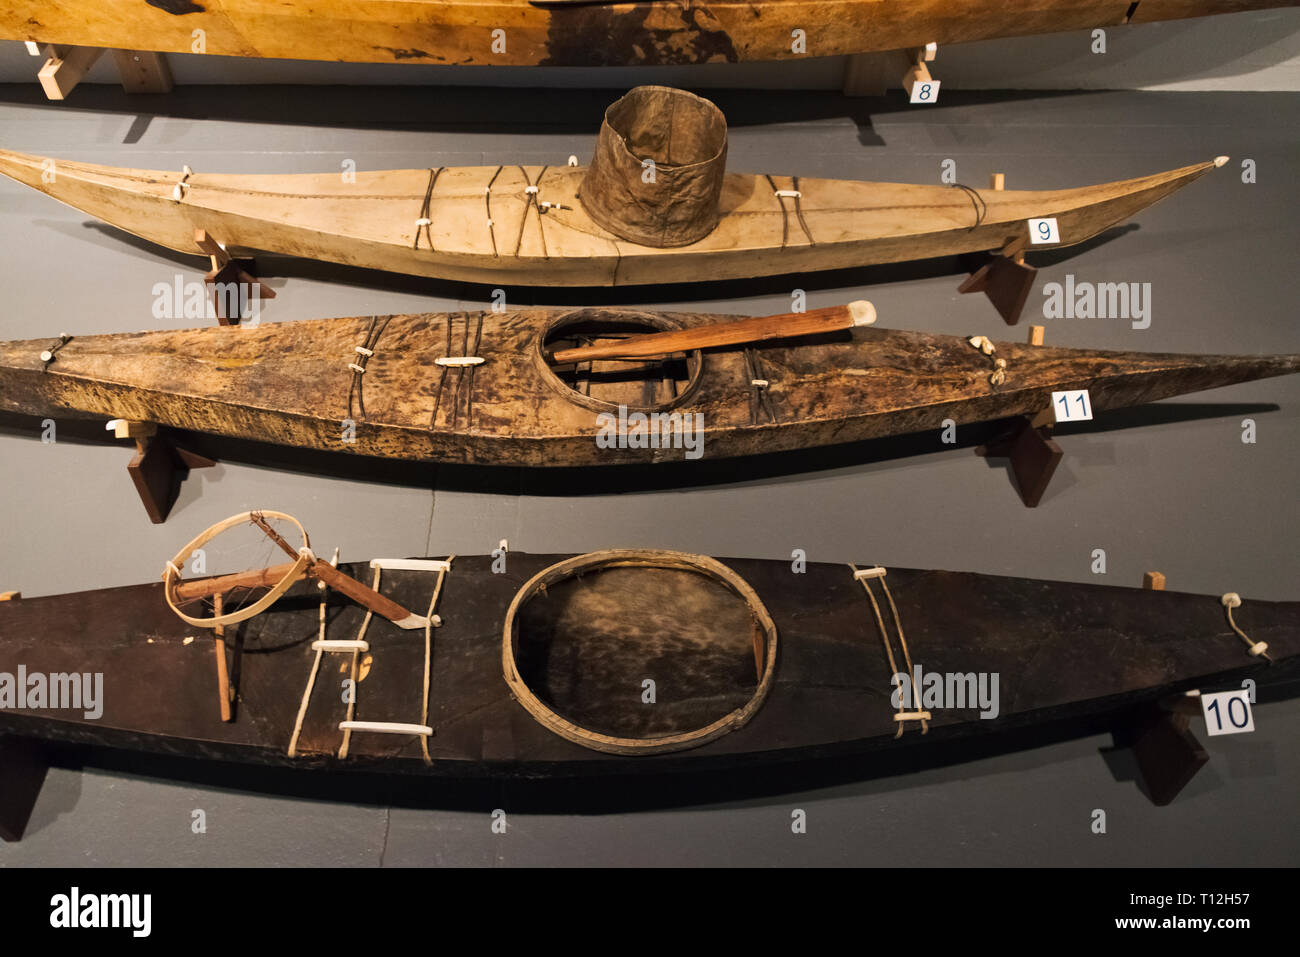 Kayak display of Inuit people's early life in the National Museum, Nuuk, Greenland Stock Photo